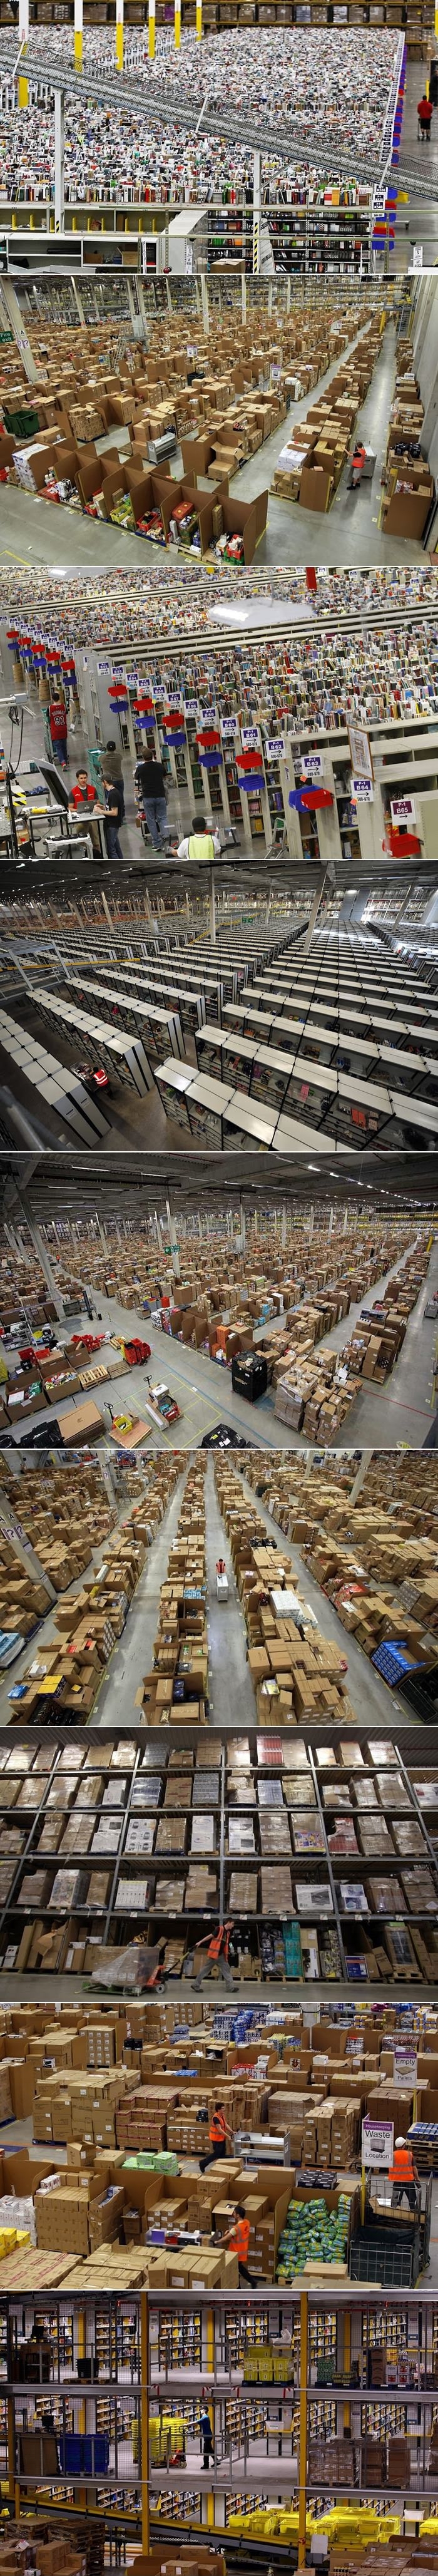 What it looks like inside an Amazon distribution center.